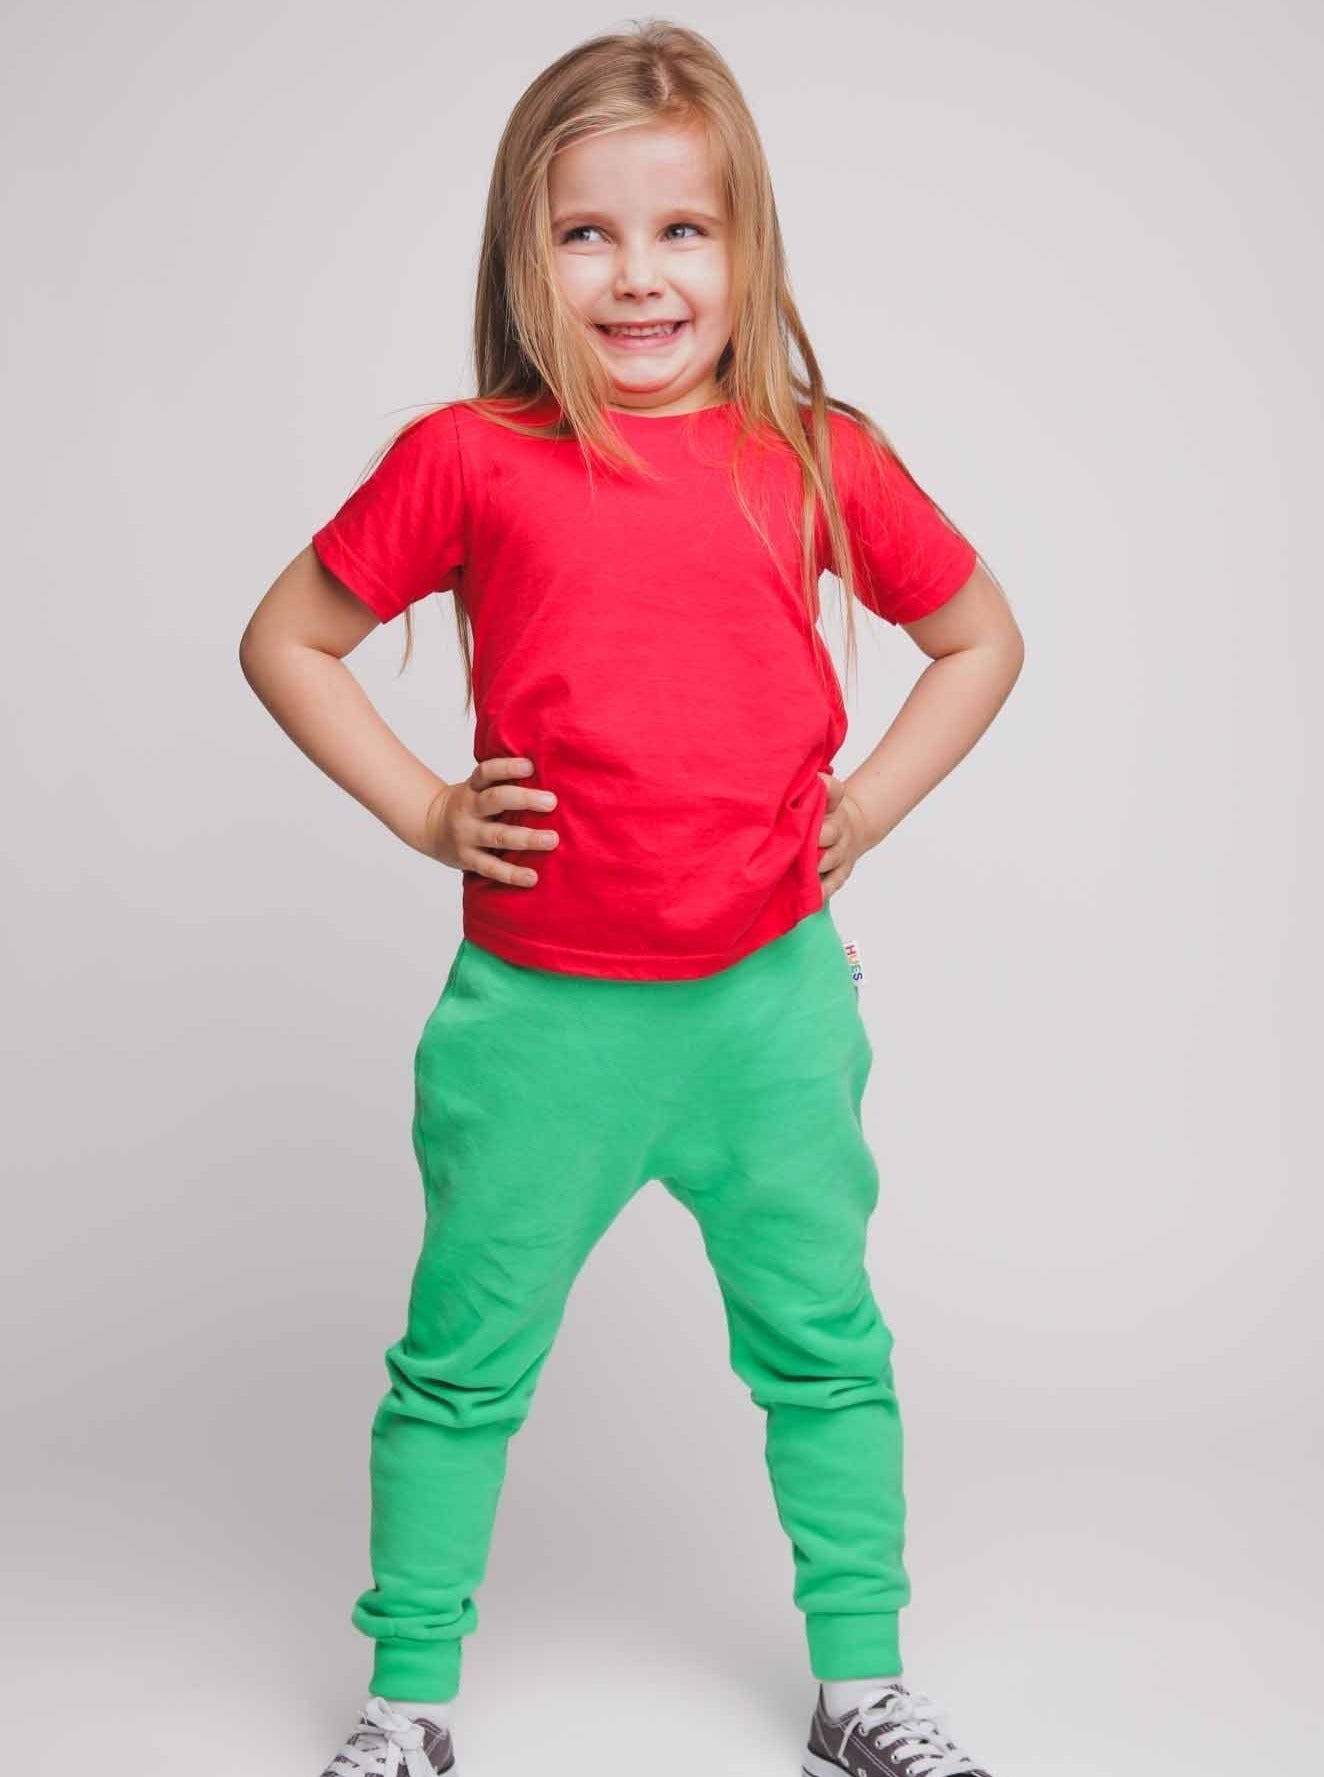 A girl wearing a red t-shirt and green joggers - Hues Clothing